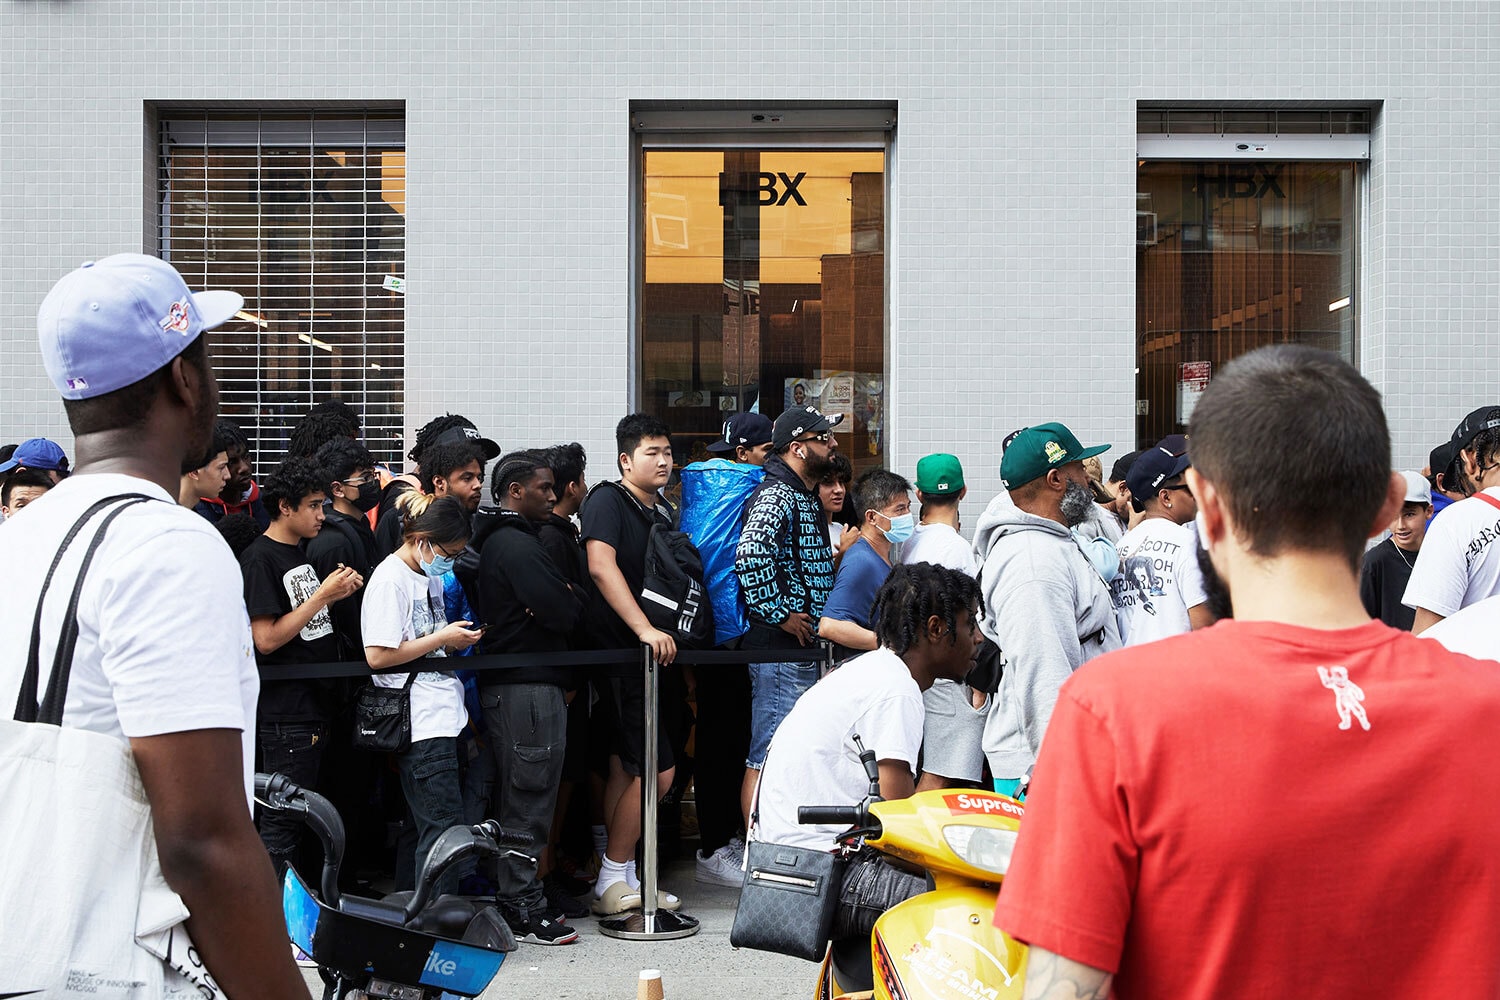 HBX 41 Division Street NYC Flagship Store Opening chinatown hypebeast inside look interiors hypebeans shop boutique